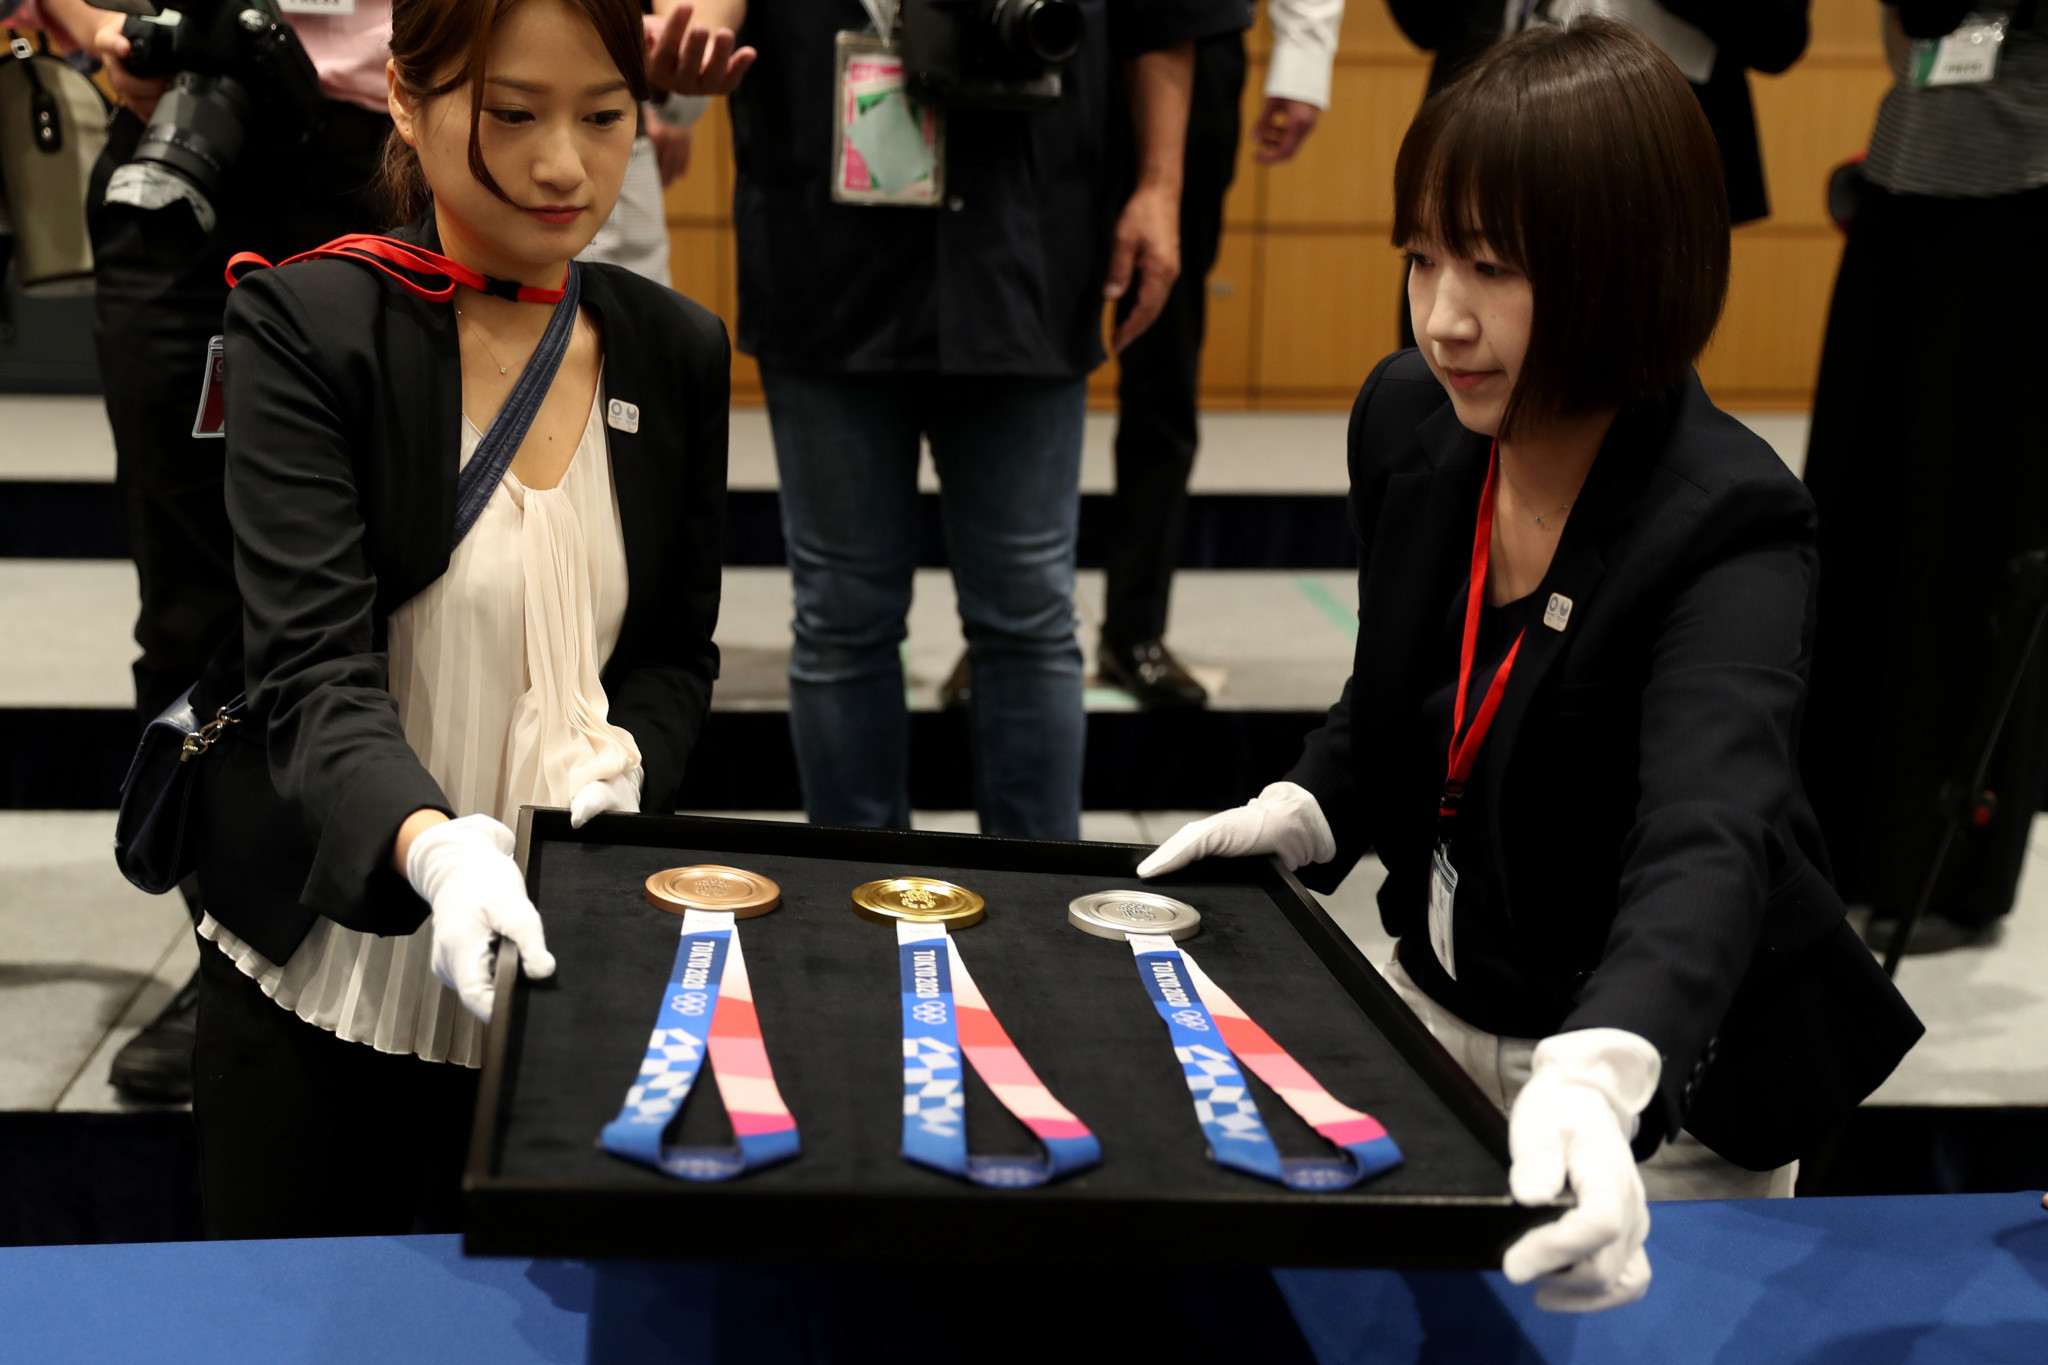 The ceremony included the unveiling of the Tokyo 2020 medal designs ©Getty Images